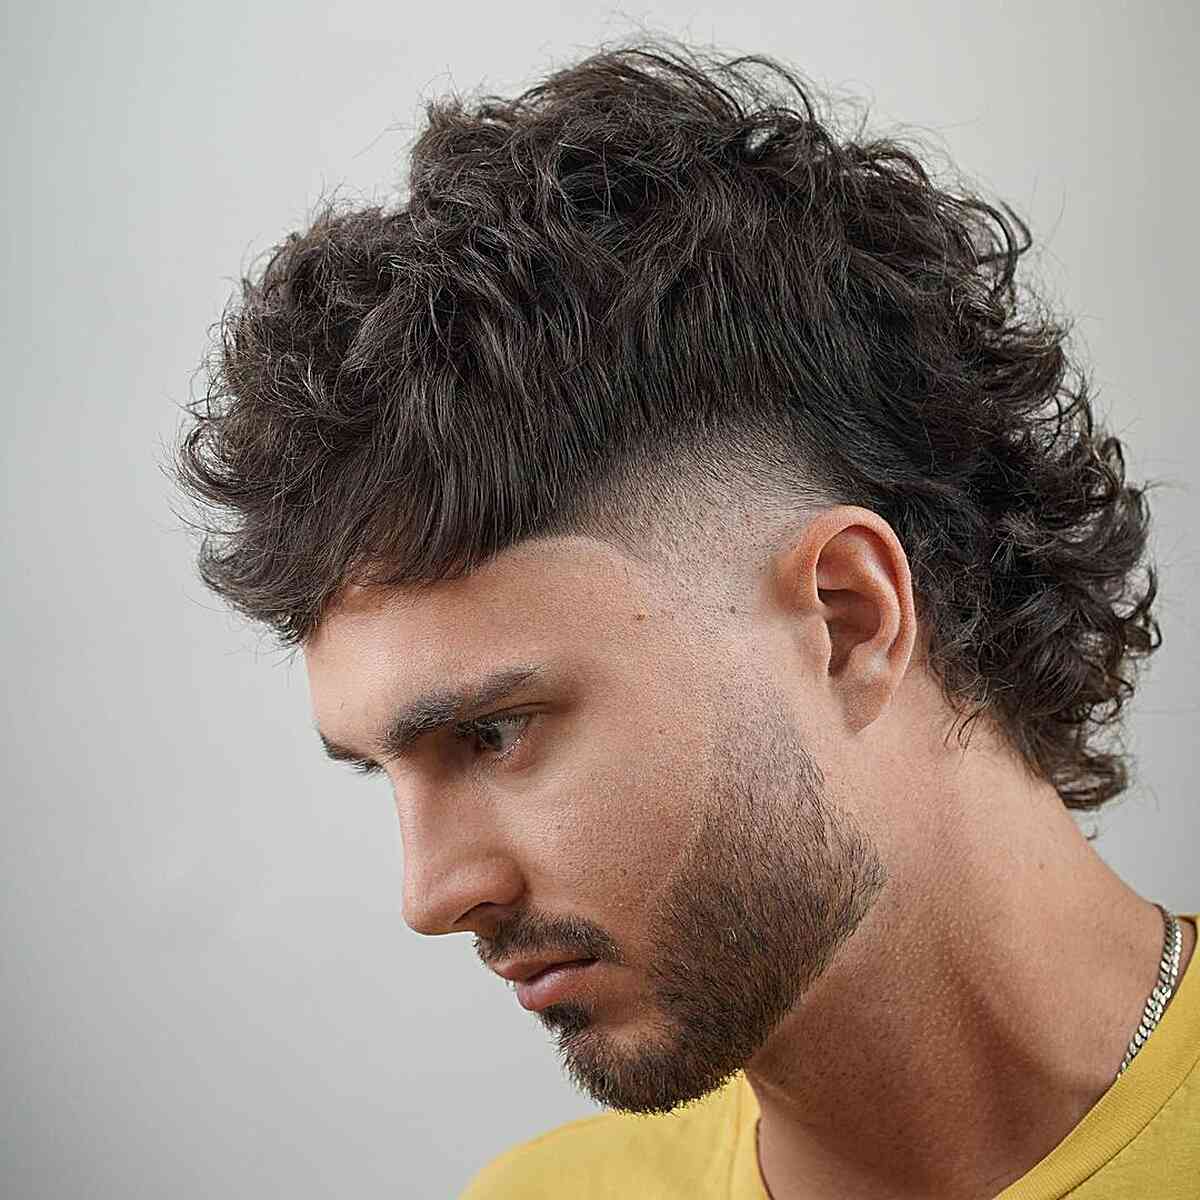 Brunette Mullet with Faded Beard for Guys